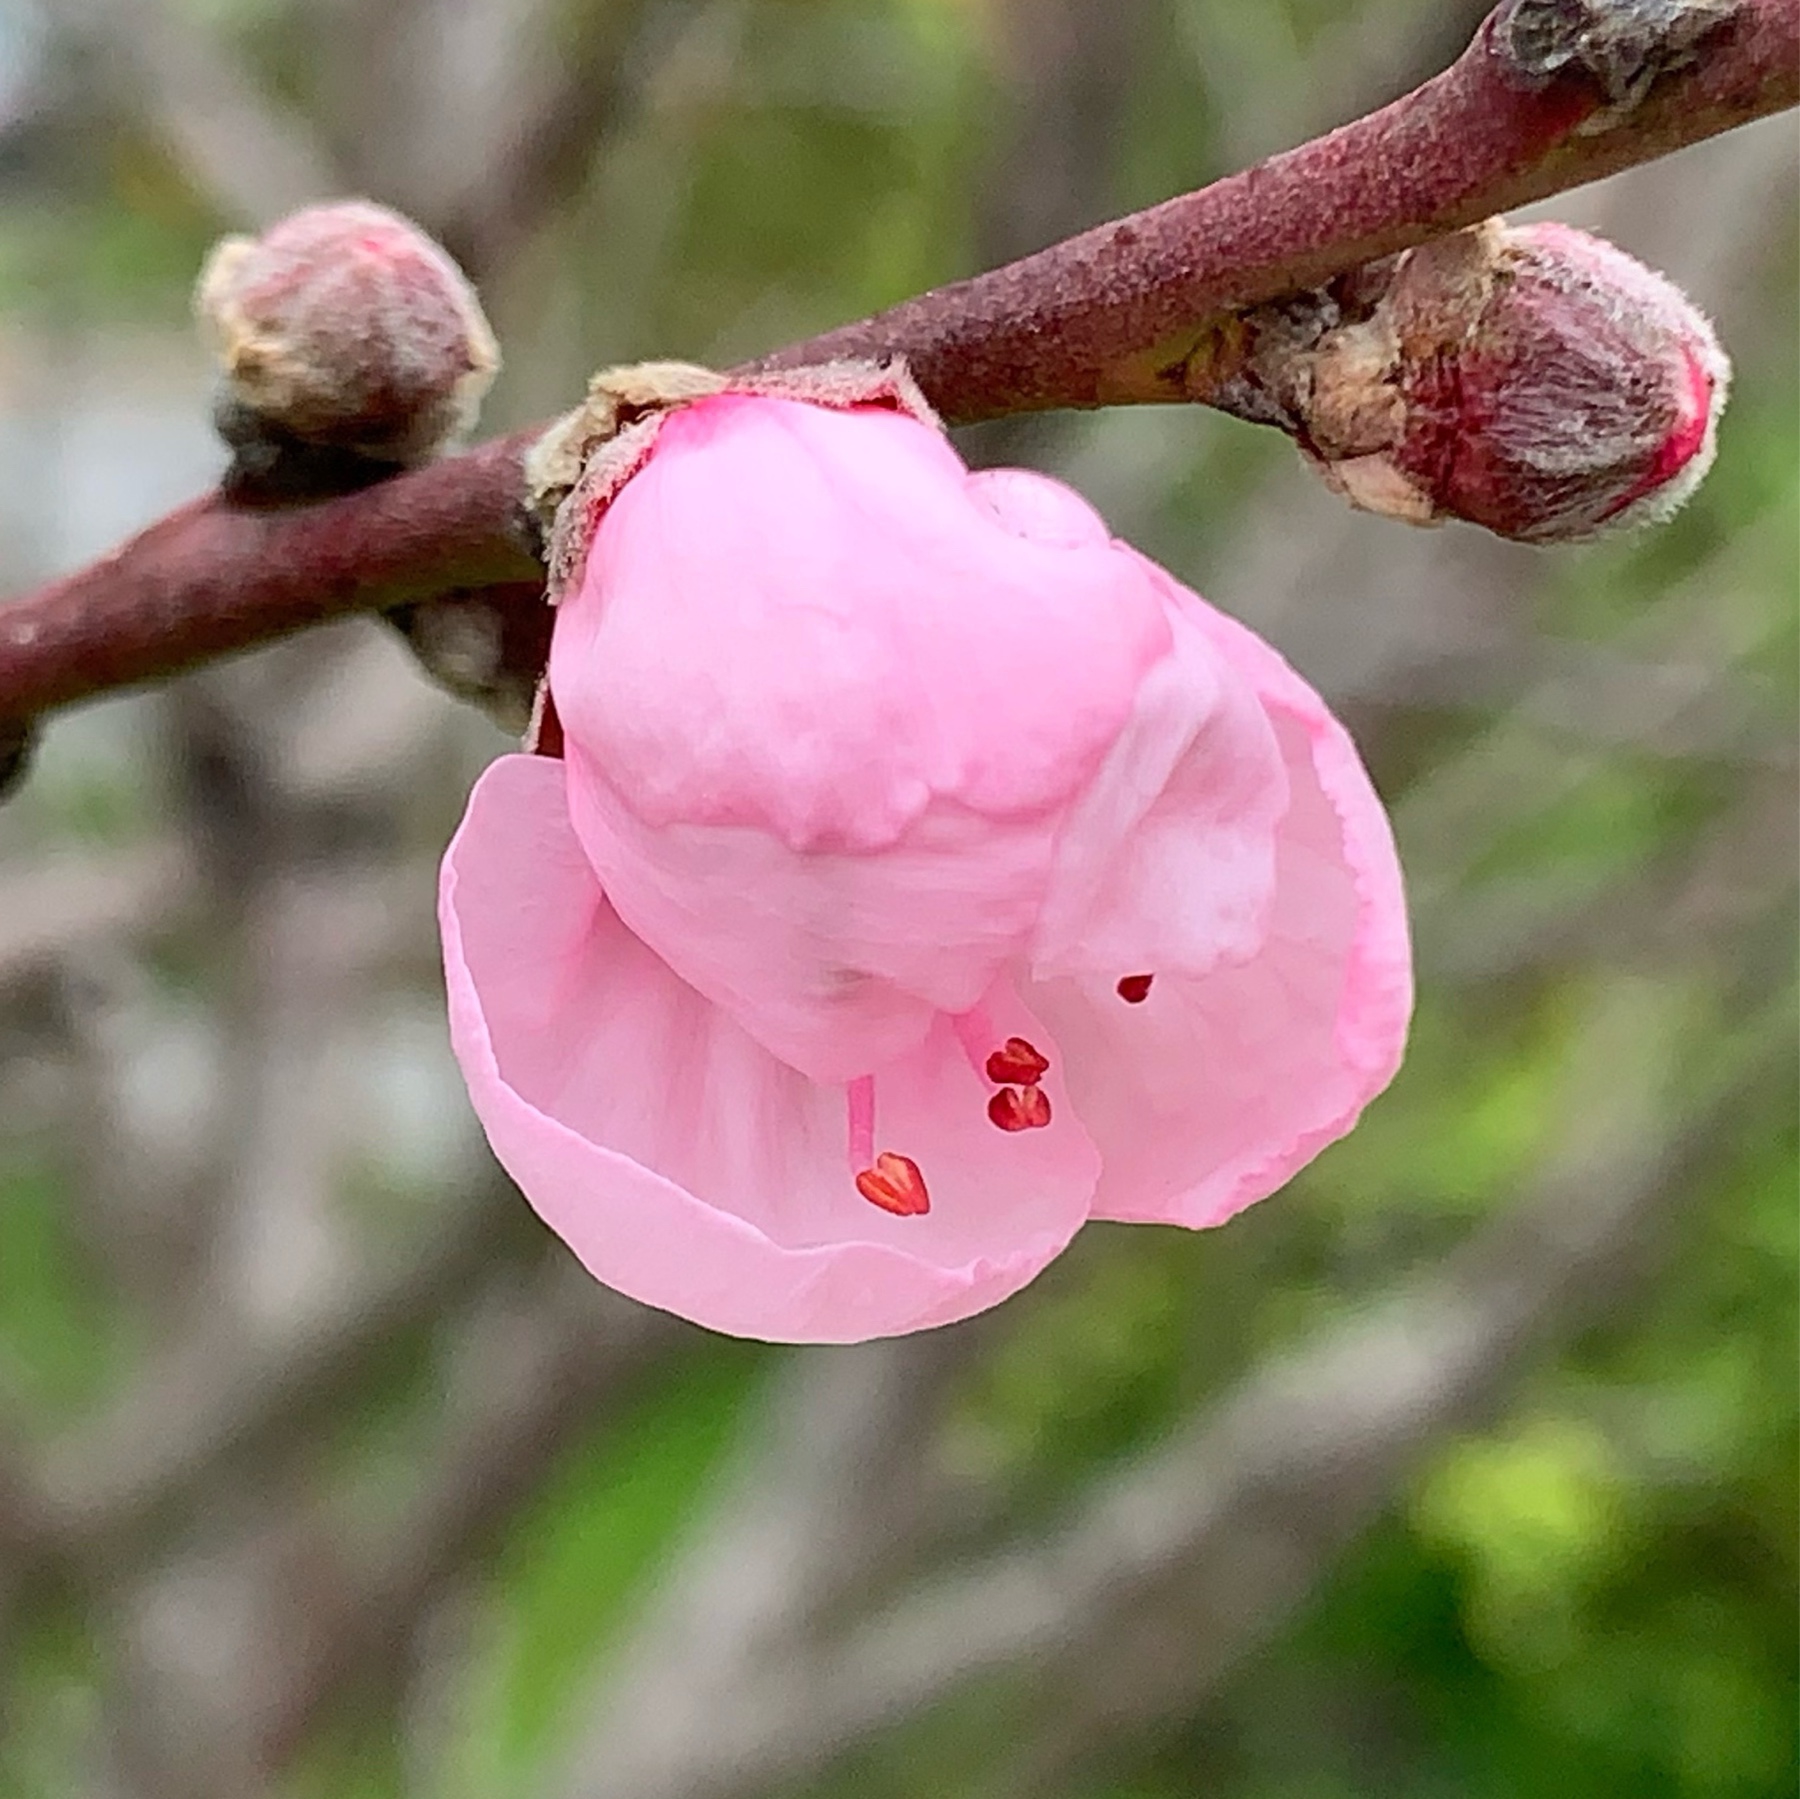 light pink, partially opened peach blossom